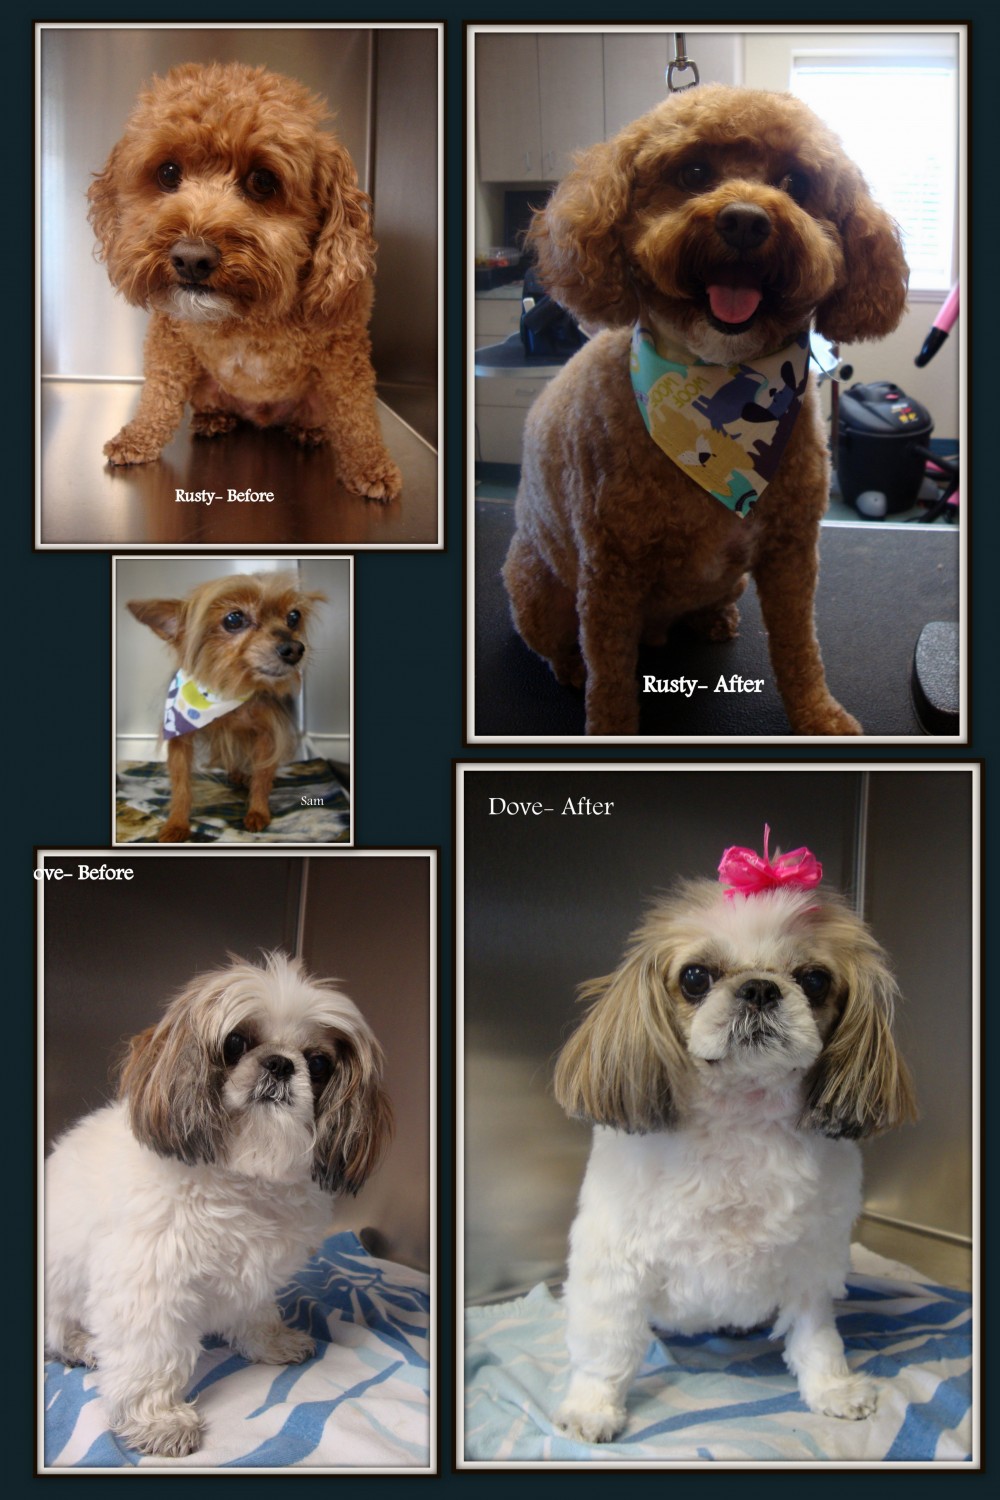 Some of our grooming clients